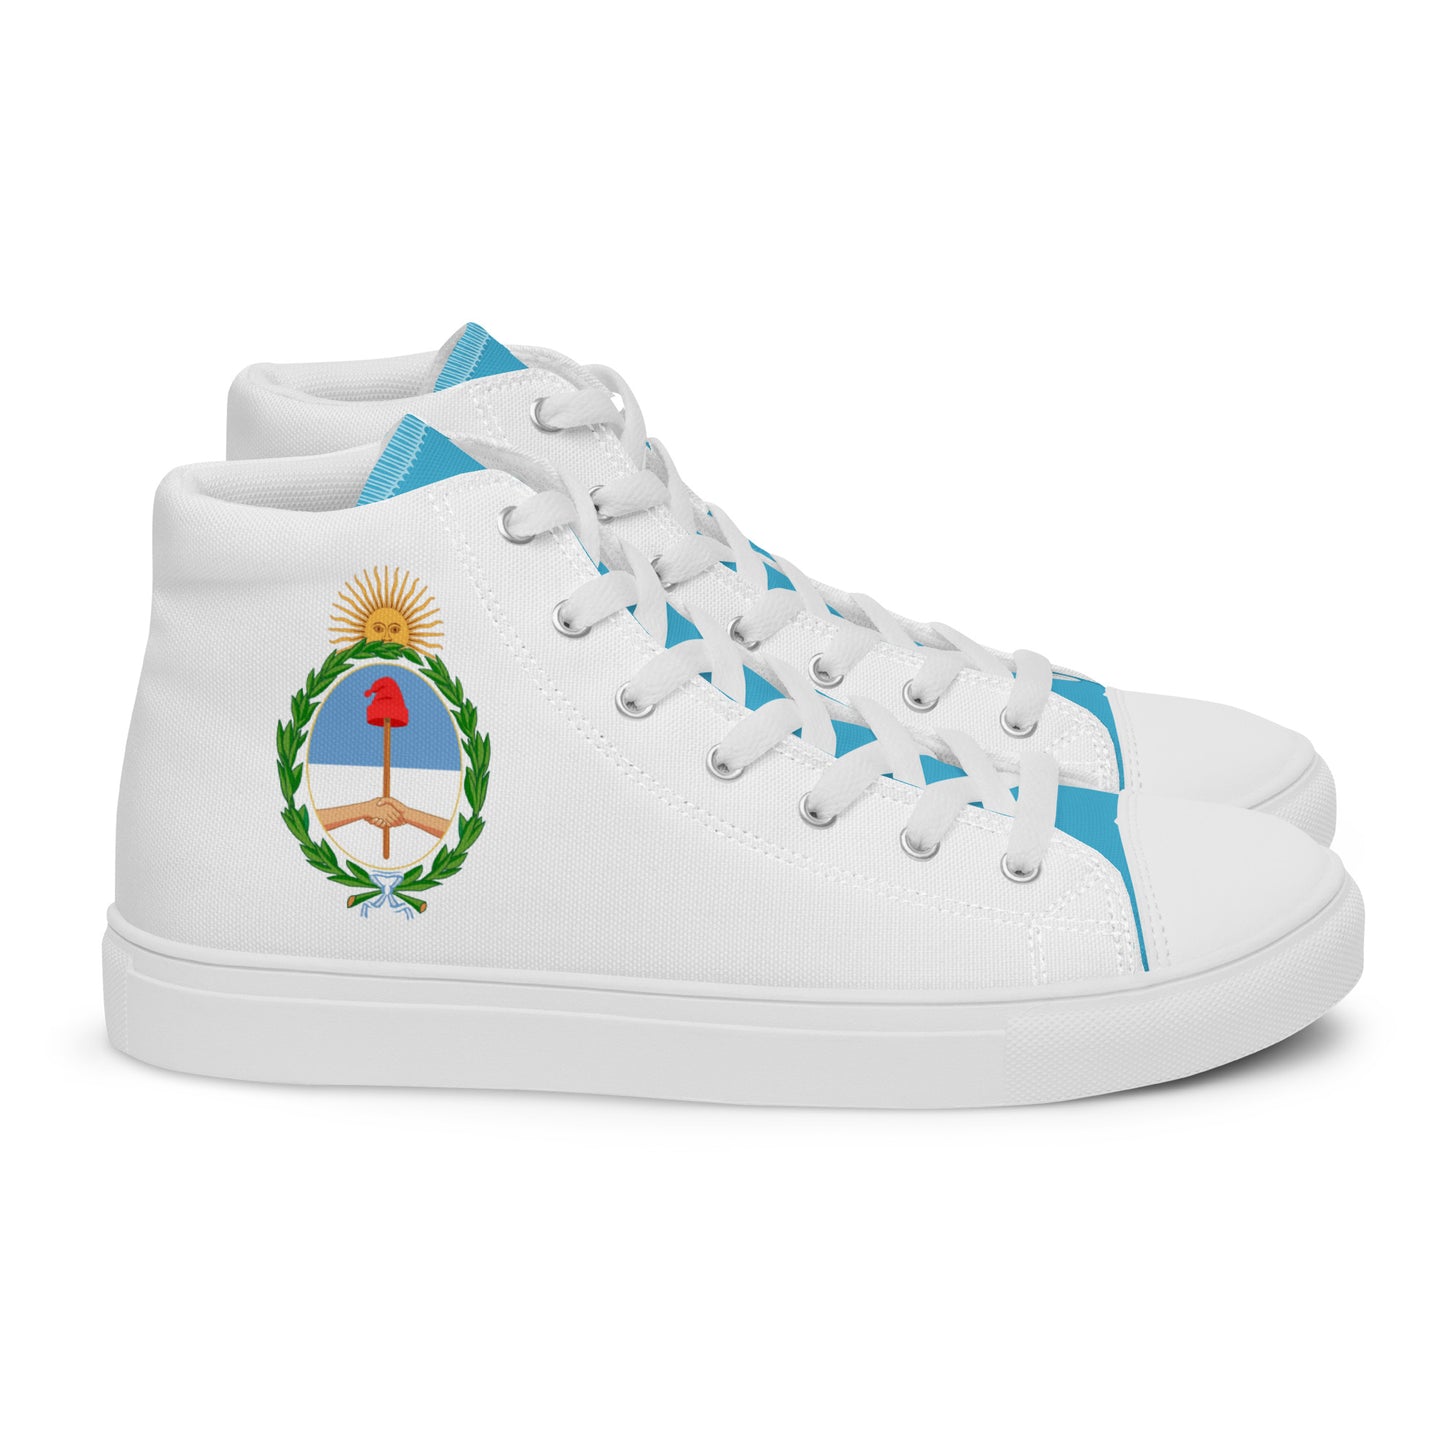 Argentina - Men - White - High top shoes